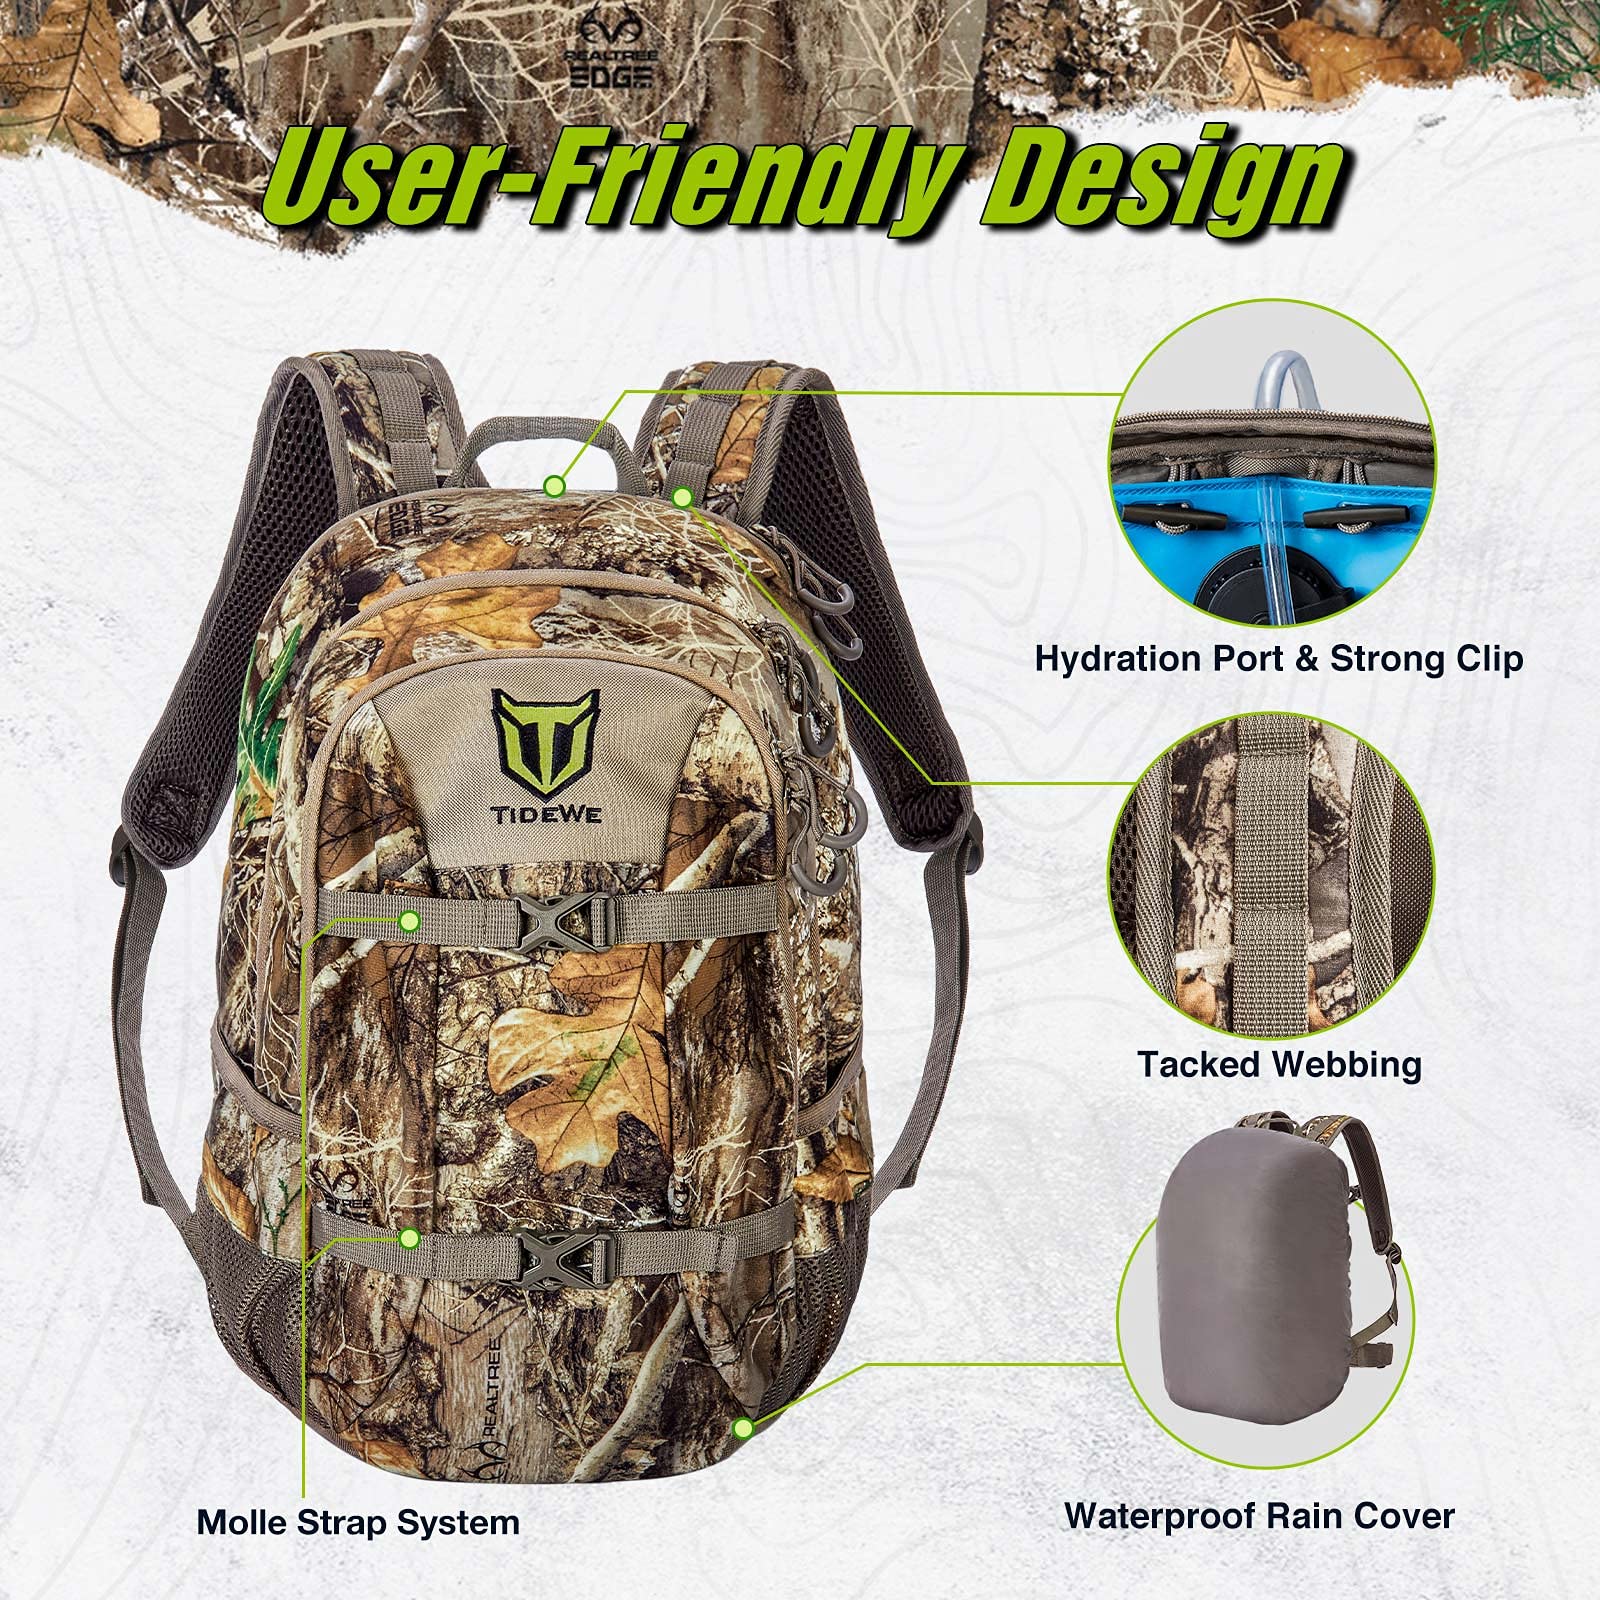 TIDEWE Hunting Backpack with Waterproof Rain Cover, 25L Realtree Edge Camo, Durable Day Pack for Bow Rifle Gun